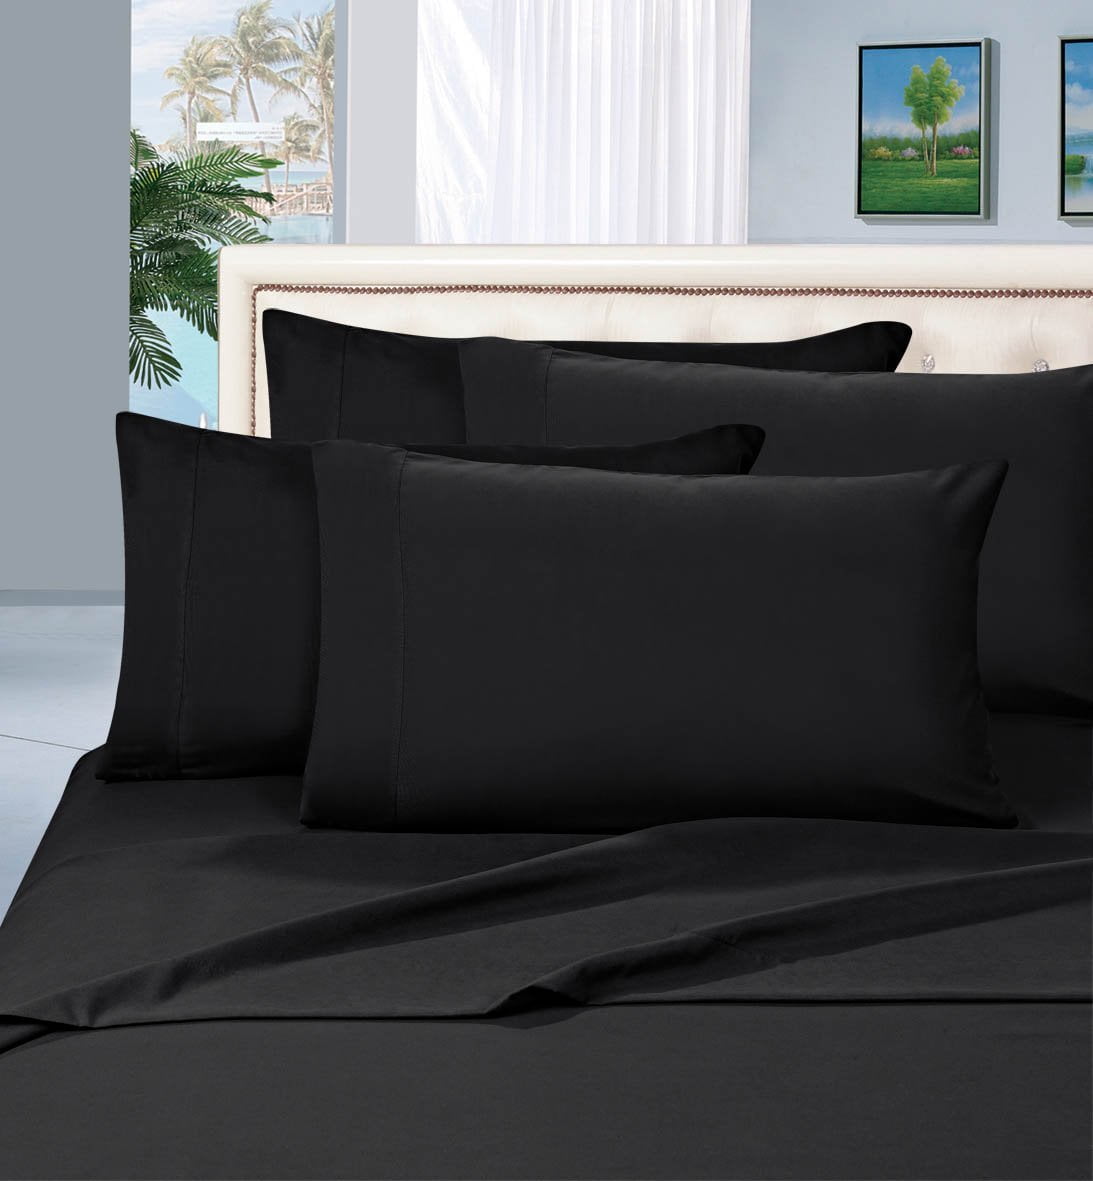 Details about   LBRO2M Bed Sheets Set Queen Size 6 Piece 16 Inches Deep Pocket 1800 Thread Count 